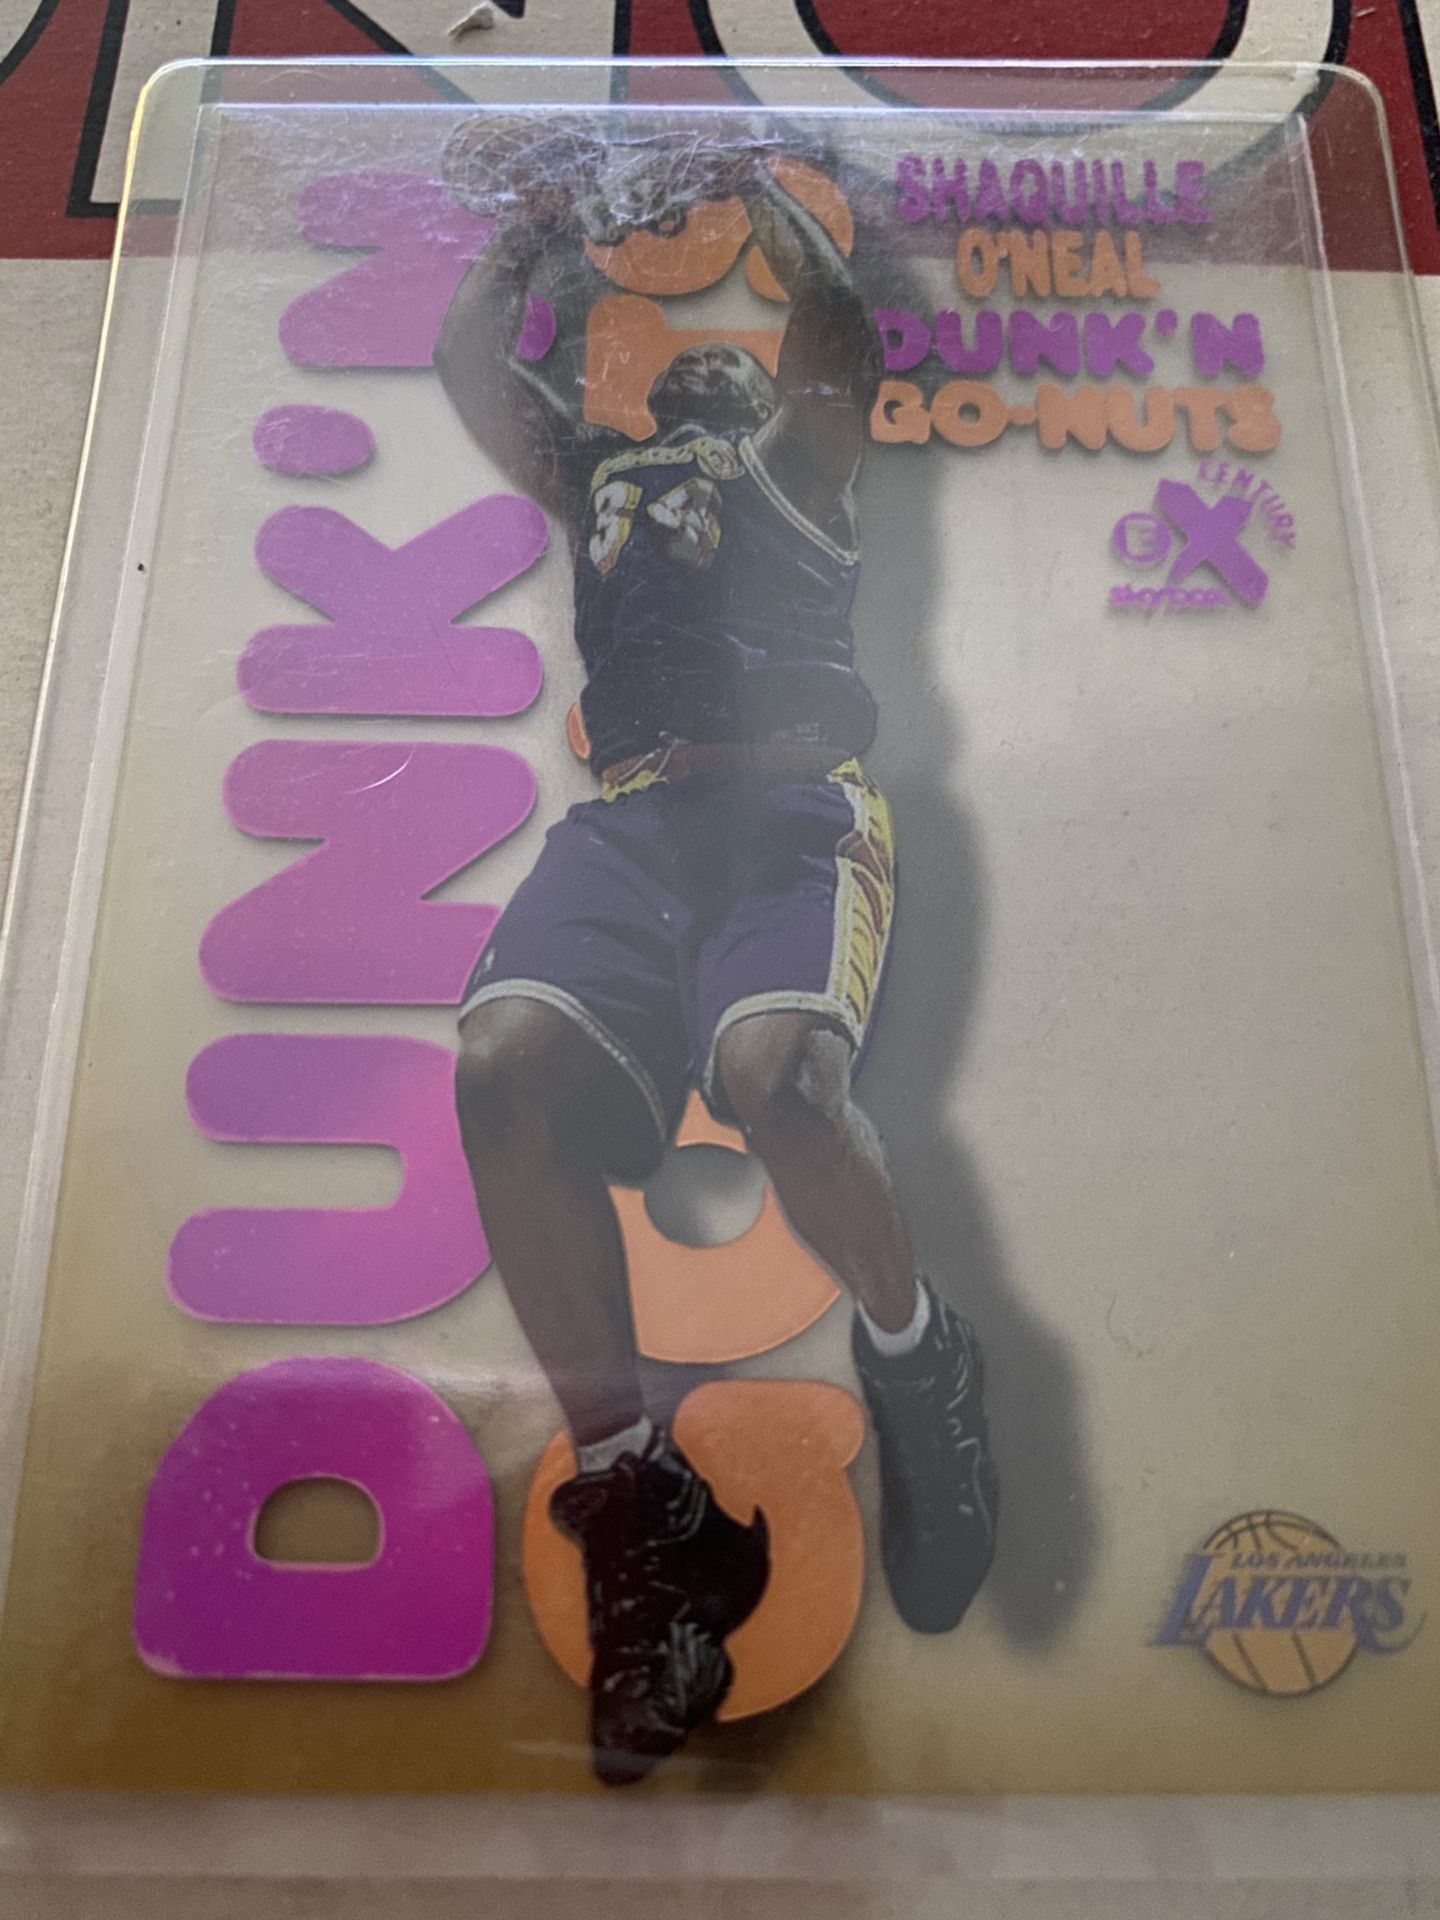 DunkNgoNuts